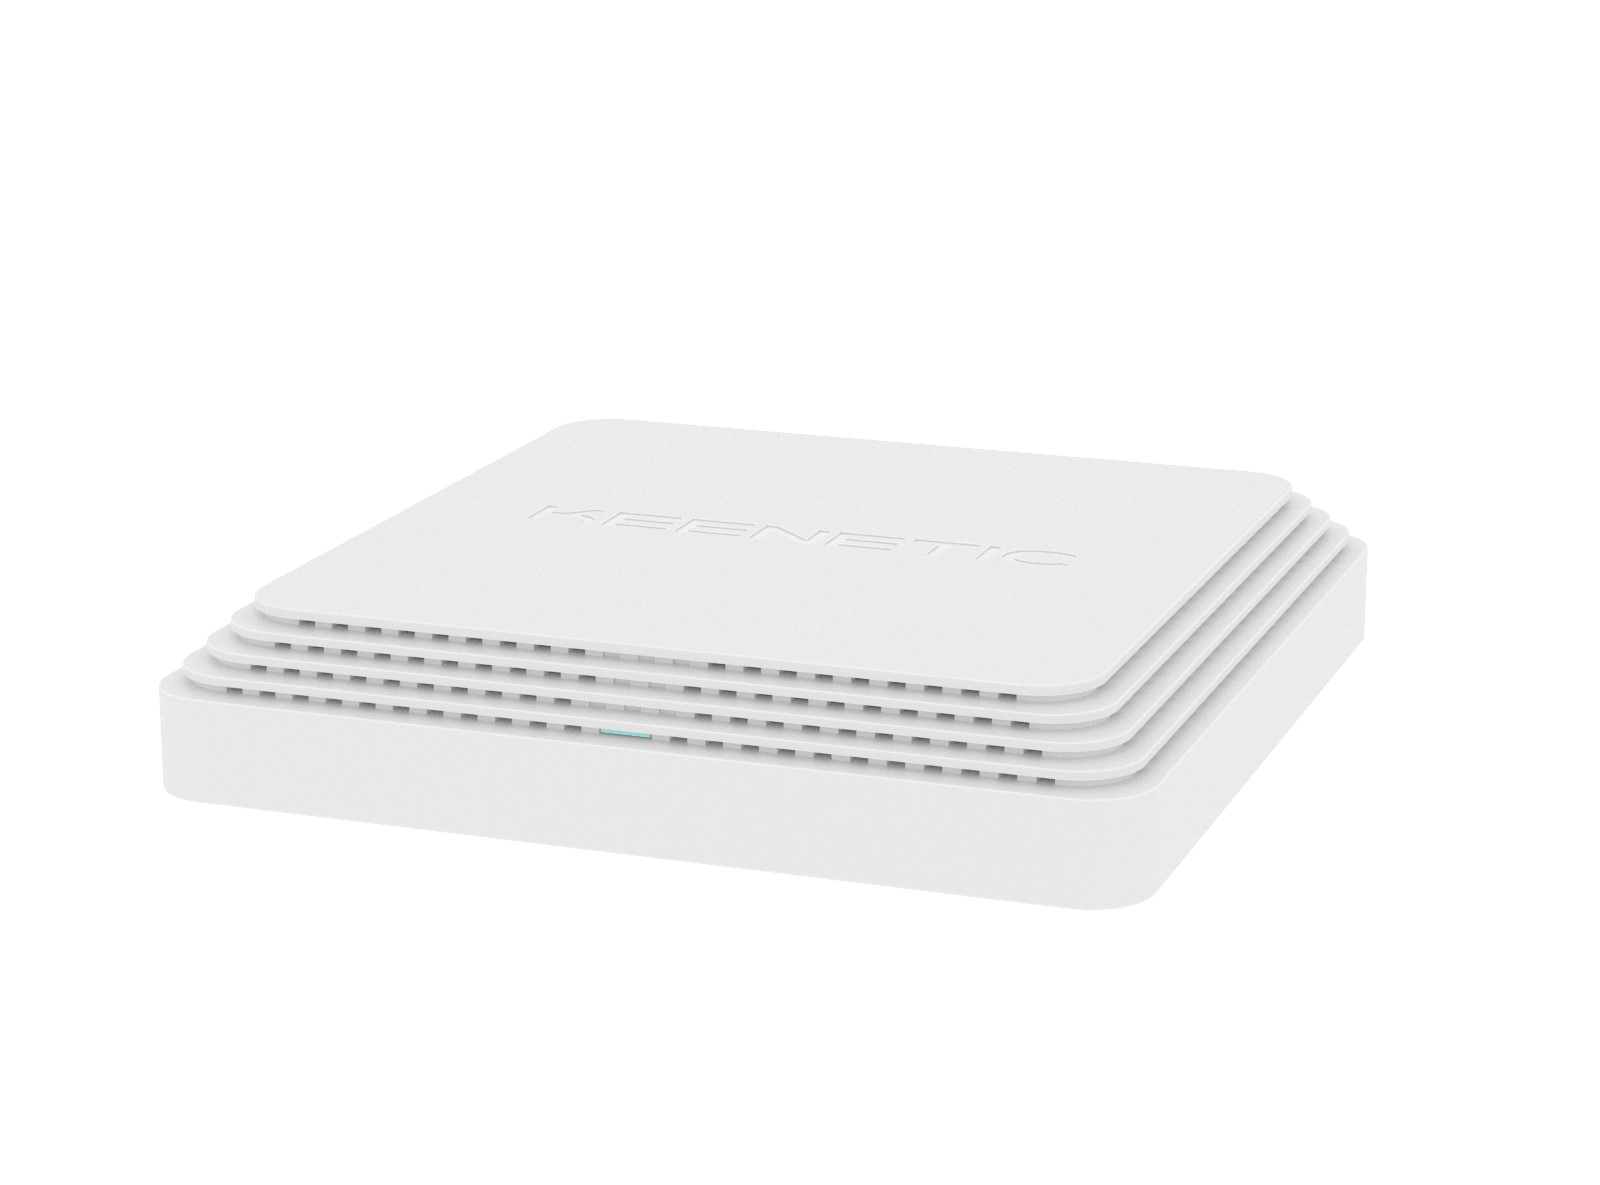 Image of KEENETIC VOYAGER PRO (KN-3510), ACCESS POINT WI-FI AX1800, MESH, 2 PORTE 1GBPS, POE, MENU MULTI LINGUA